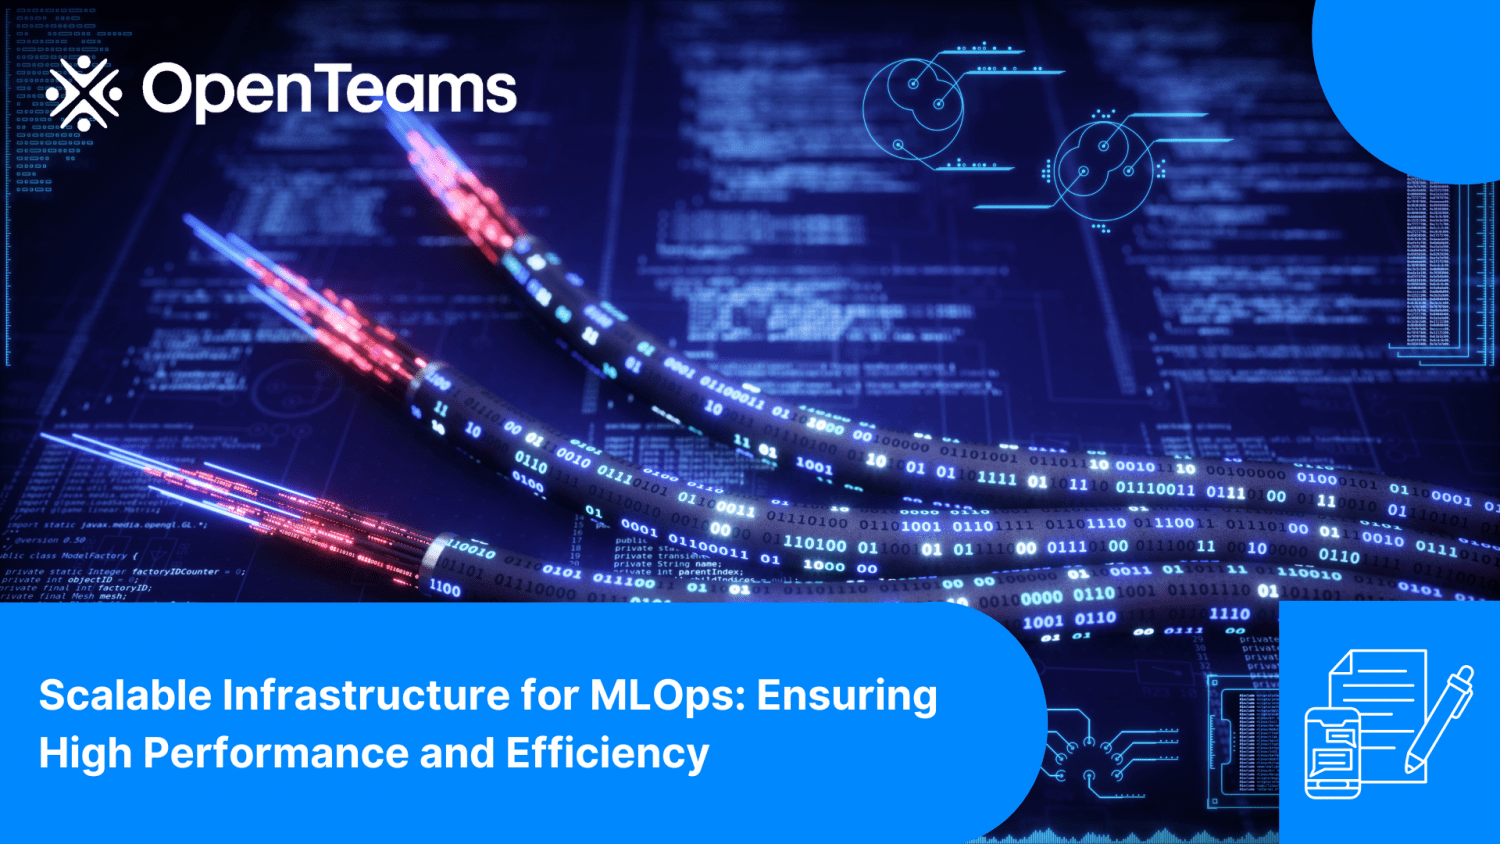 Scalable Infrastructure for MLOps: Ensuring High Performance and Efficiency